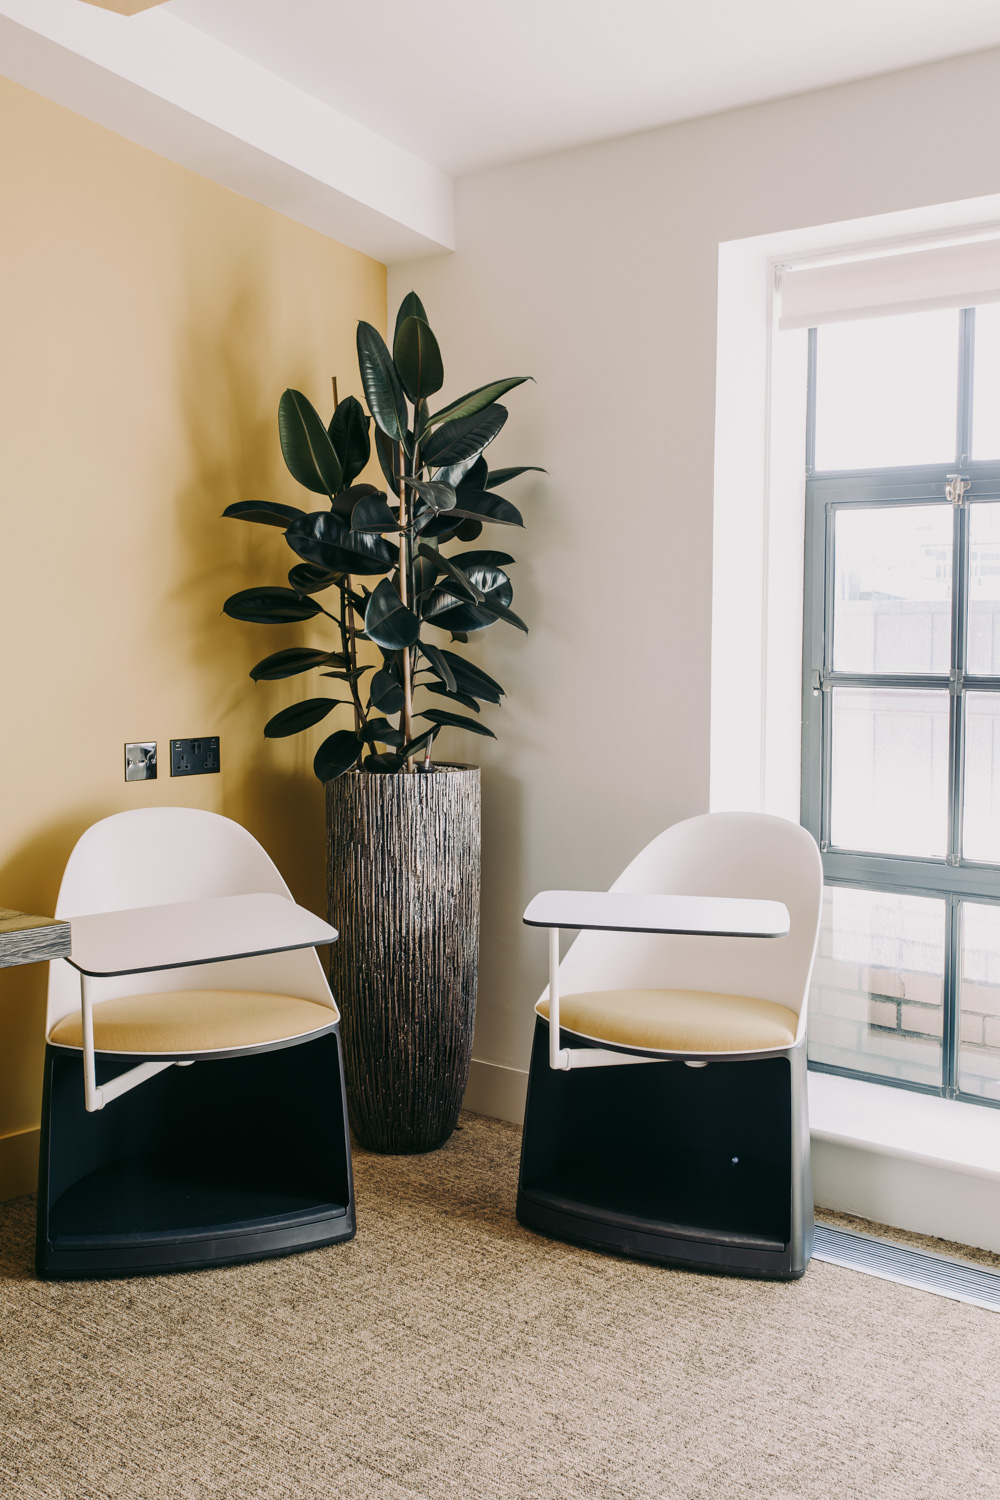 Two chairs in a corner with a large interior plant in between